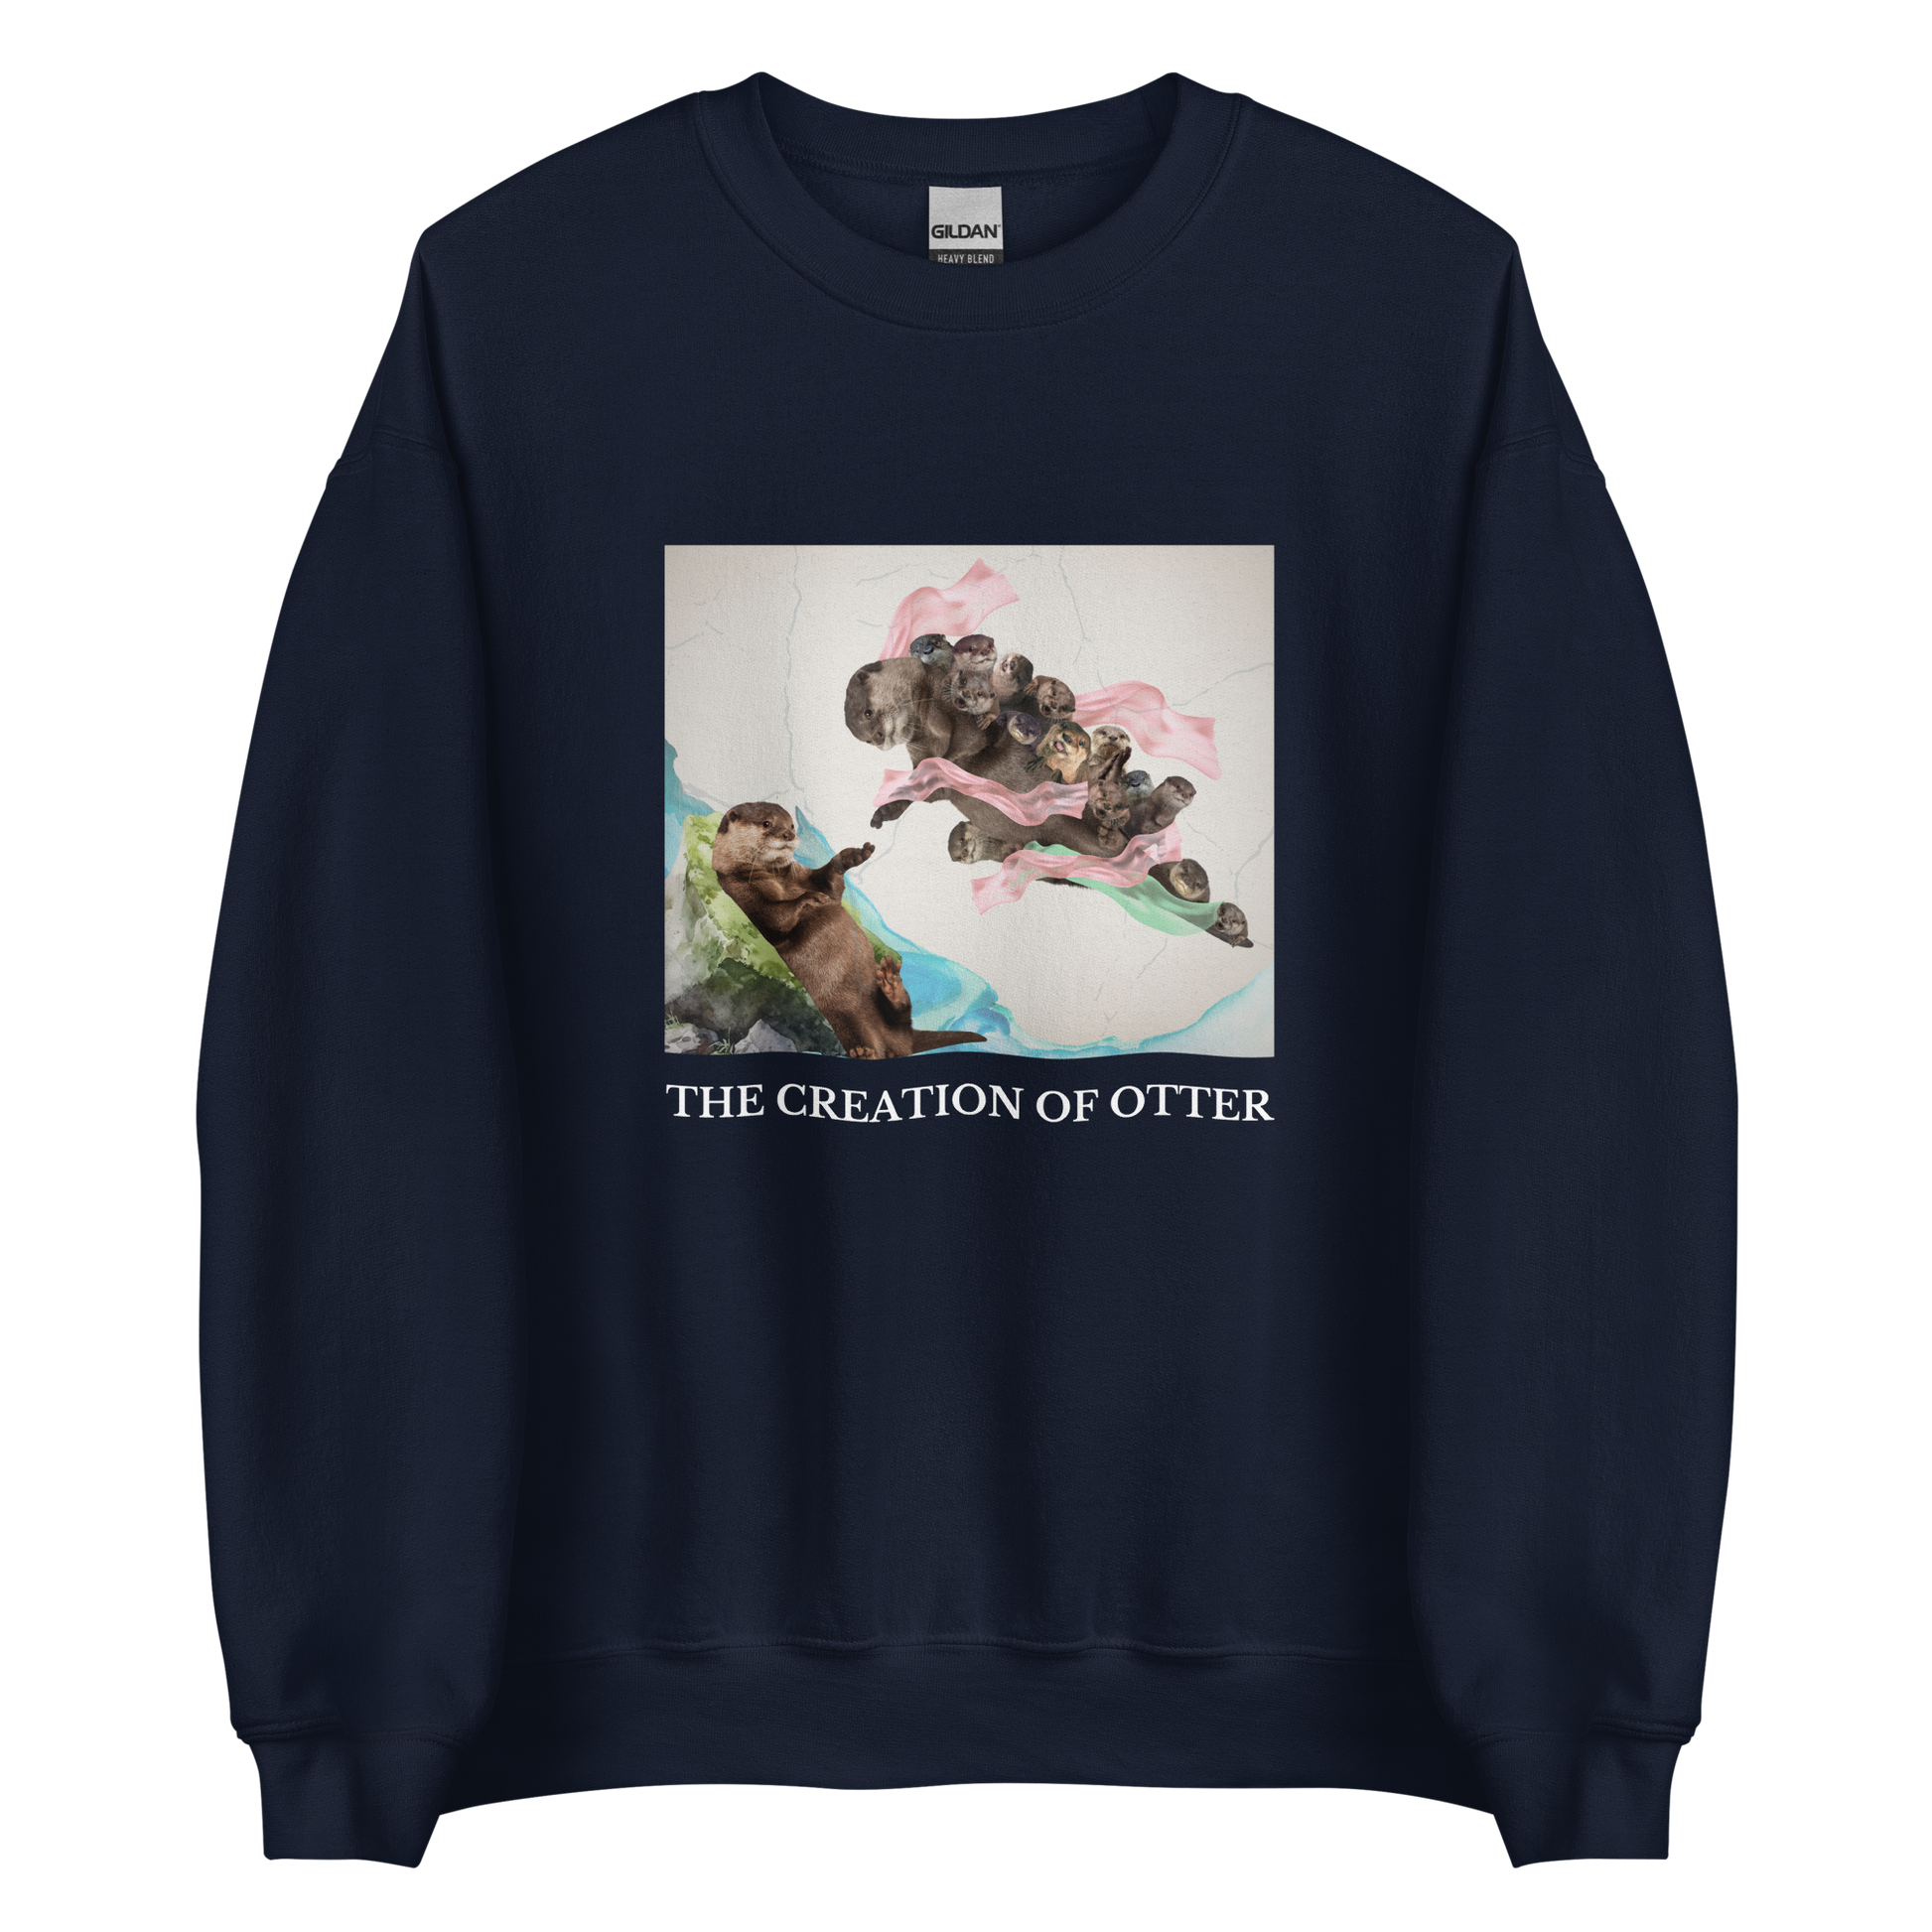 Navy Otter Sweatshirt featuring a playful The Creation of Otter parody of Michelangelo's masterpiece - Artsy/Funny Graphic Otter Sweatshirts - Boozy Fox